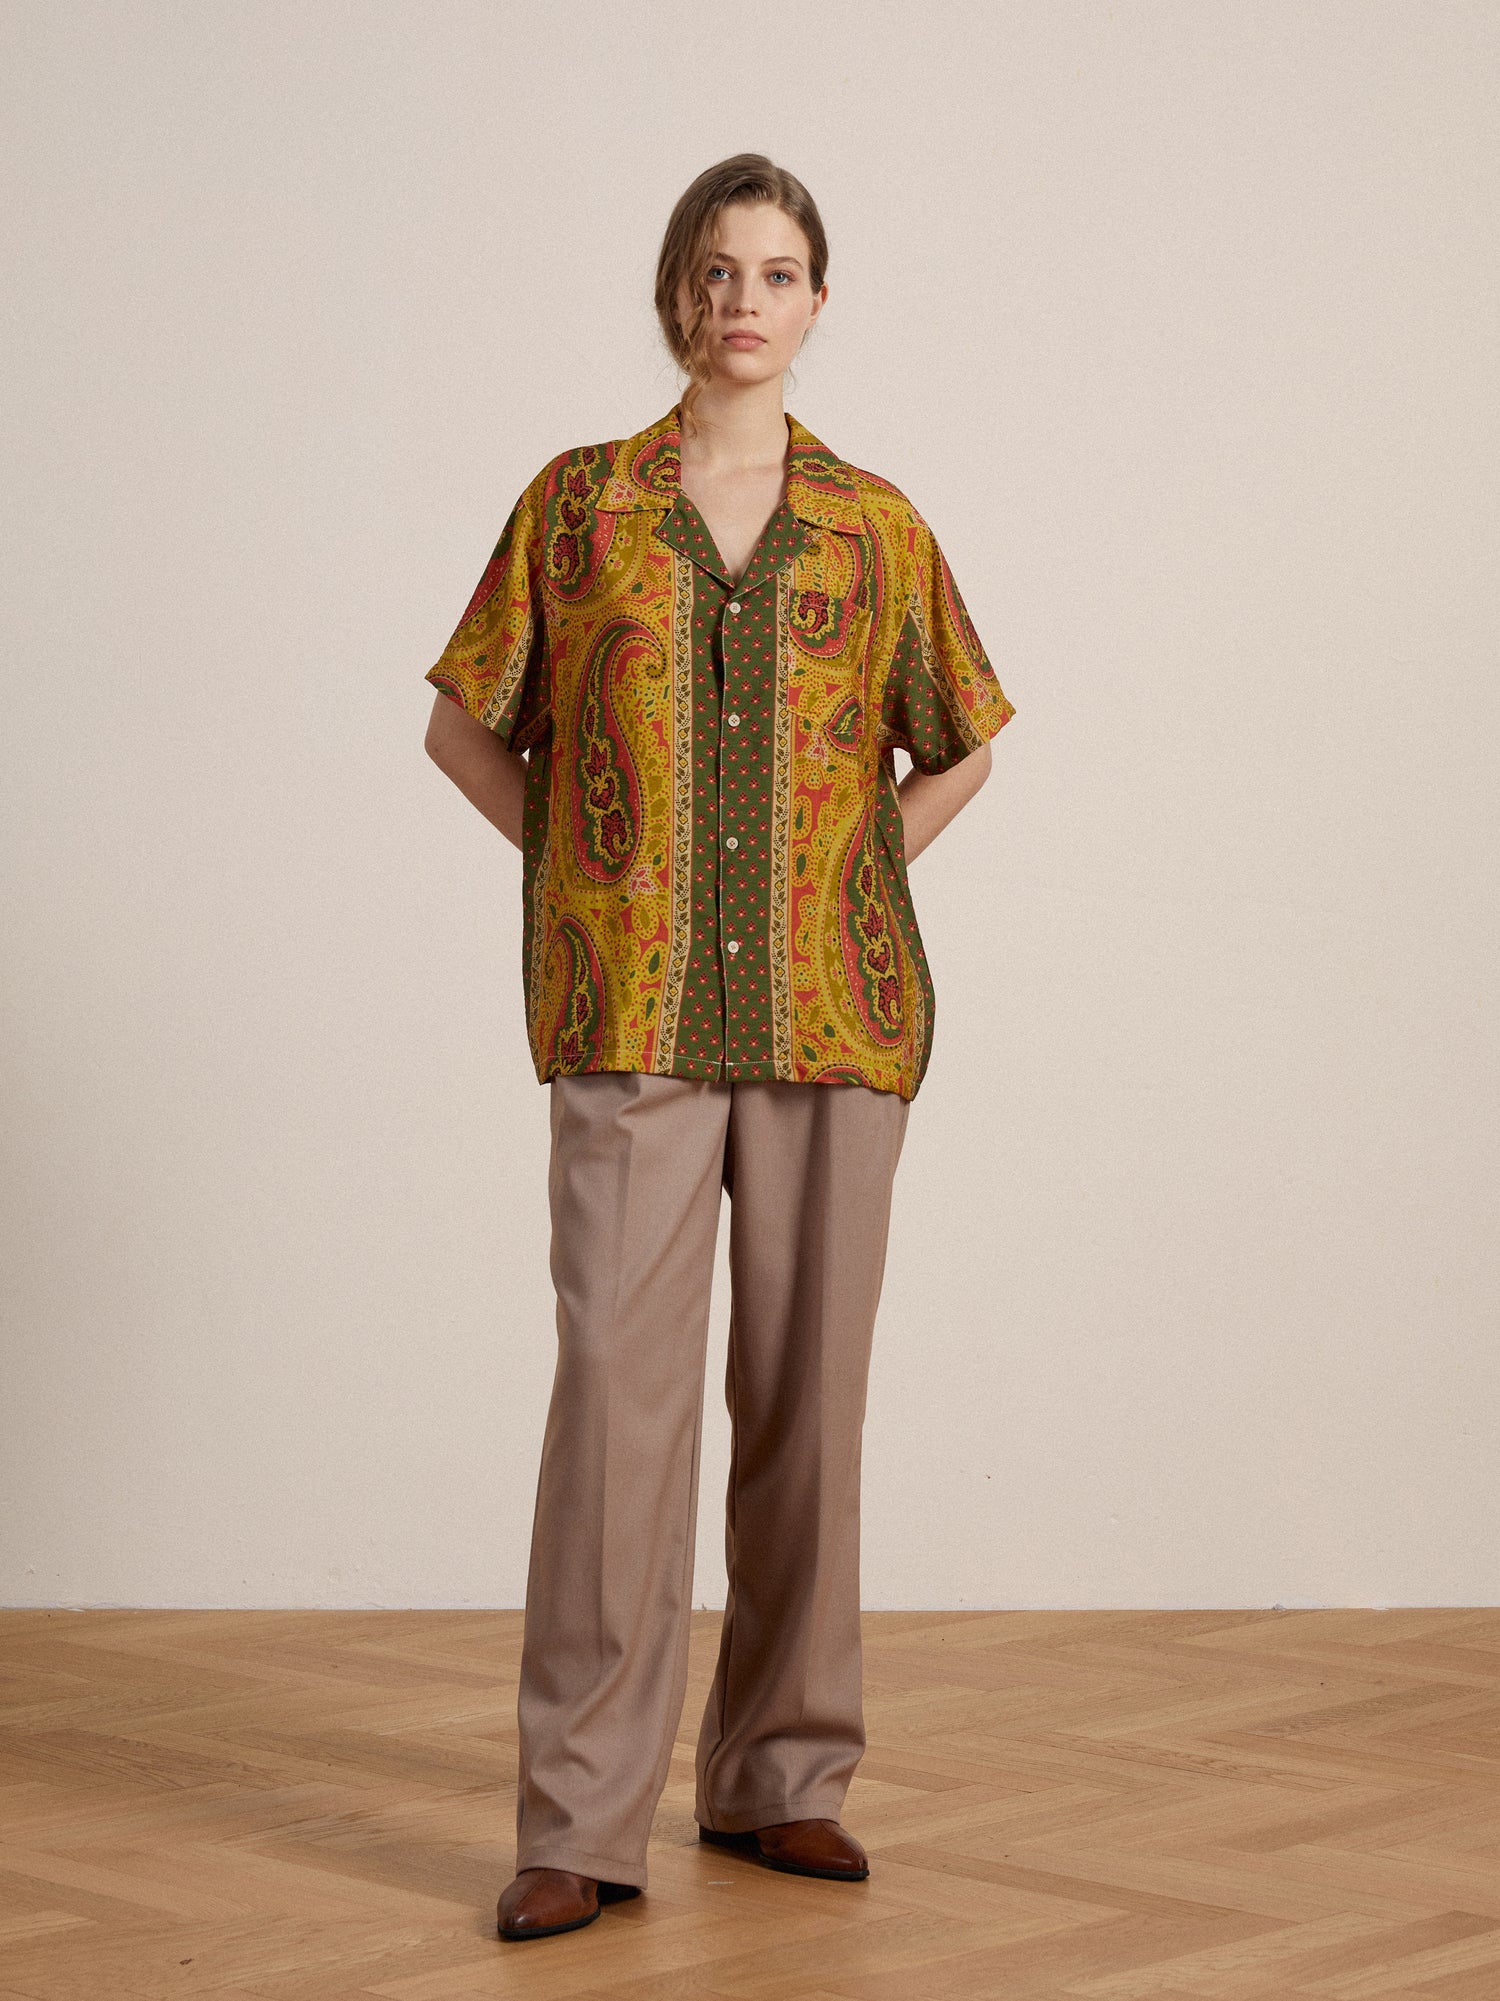 A woman wearing a yellow Pench Paisley SS Camp Shirt by Found and beige pants.